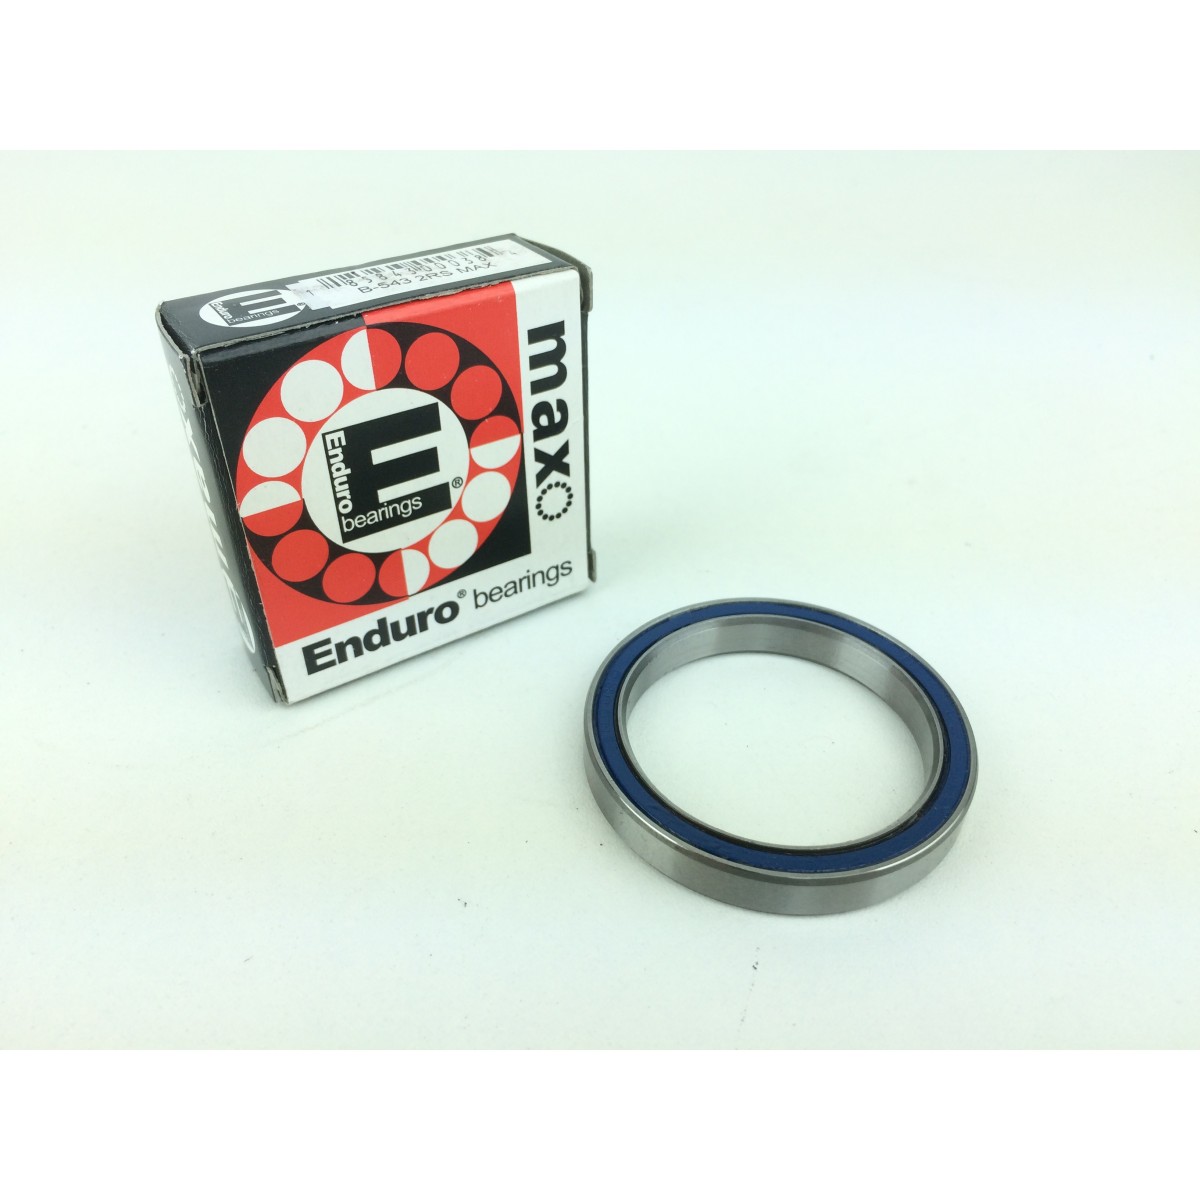 ENDURO BEARING roulement de direction CANNONDALE LEFTY-FATTY B543 2RS - NEUF